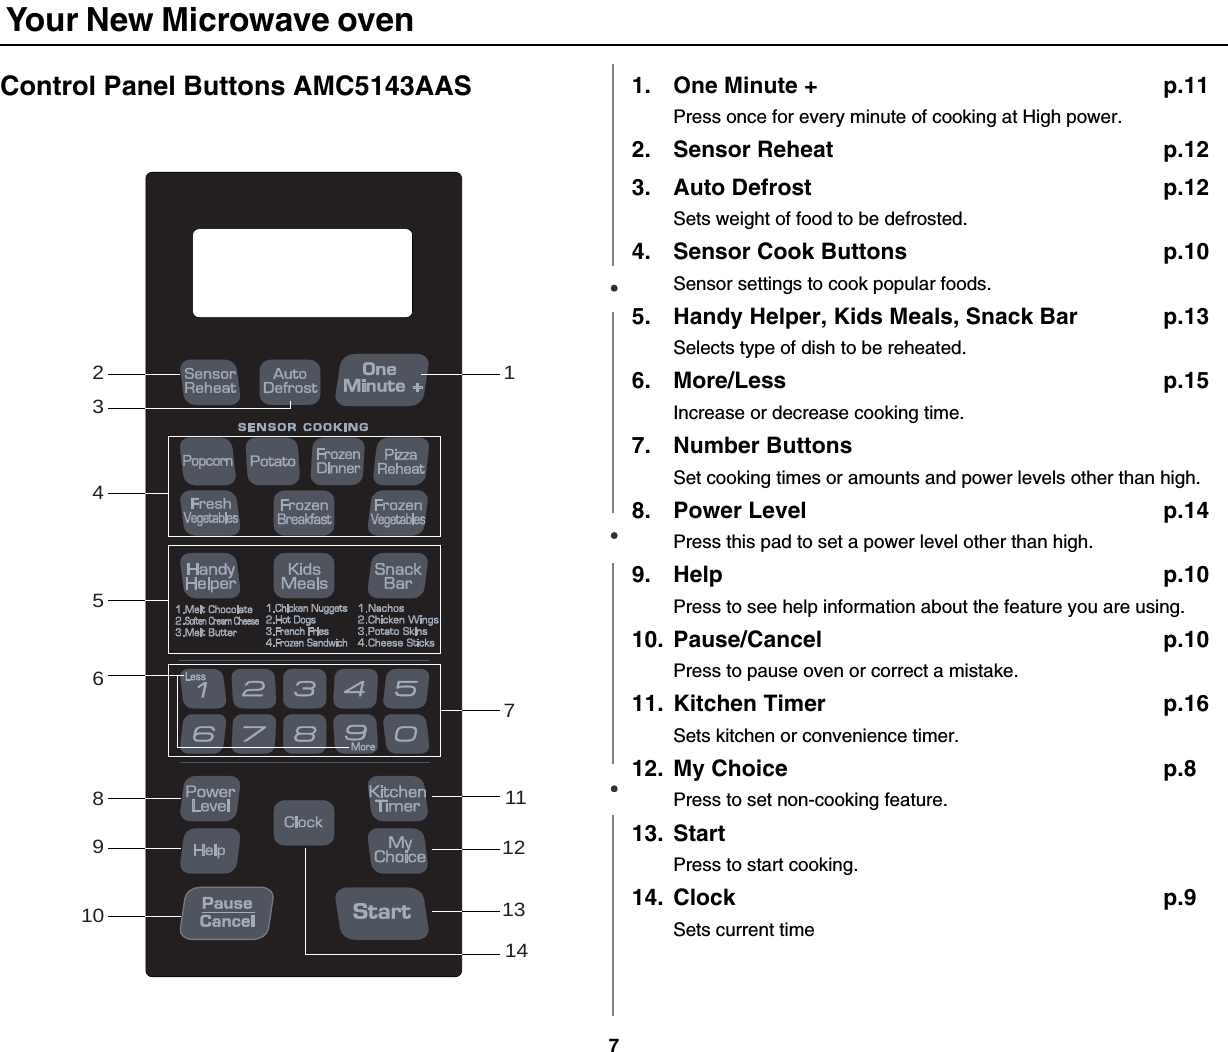 7 Your New Microwave ovenControl Panel Buttons AMC5143AAS 1. One Minute + p.11Press once for every minute of cooking at High power.2. Sensor Reheat p.123. Auto Defrost p.12Sets weight of food to be defrosted.4. Sensor Cook Buttons p.10Sensor settings to cook popular foods.5. Handy Helper, Kids Meals, Snack Bar p.13Selects type of dish to be reheated.6. More/Less p.15Increase or decrease cooking time.7. Number ButtonsSet cooking times or amounts and power levels other than high.8. Power Level p.14Press this pad to set a power level other than high.9. Help p.10Press to see help information about the feature you are using.10. Pause/Cancel p.10Press to pause oven or correct a mistake.11. Kitchen Timer p.16 Sets kitchen or convenience timer.12. My Choice p.8Press to set non-cooking feature.13. StartPress to start cooking.14. Clock p.9Sets current time1711121314234568910